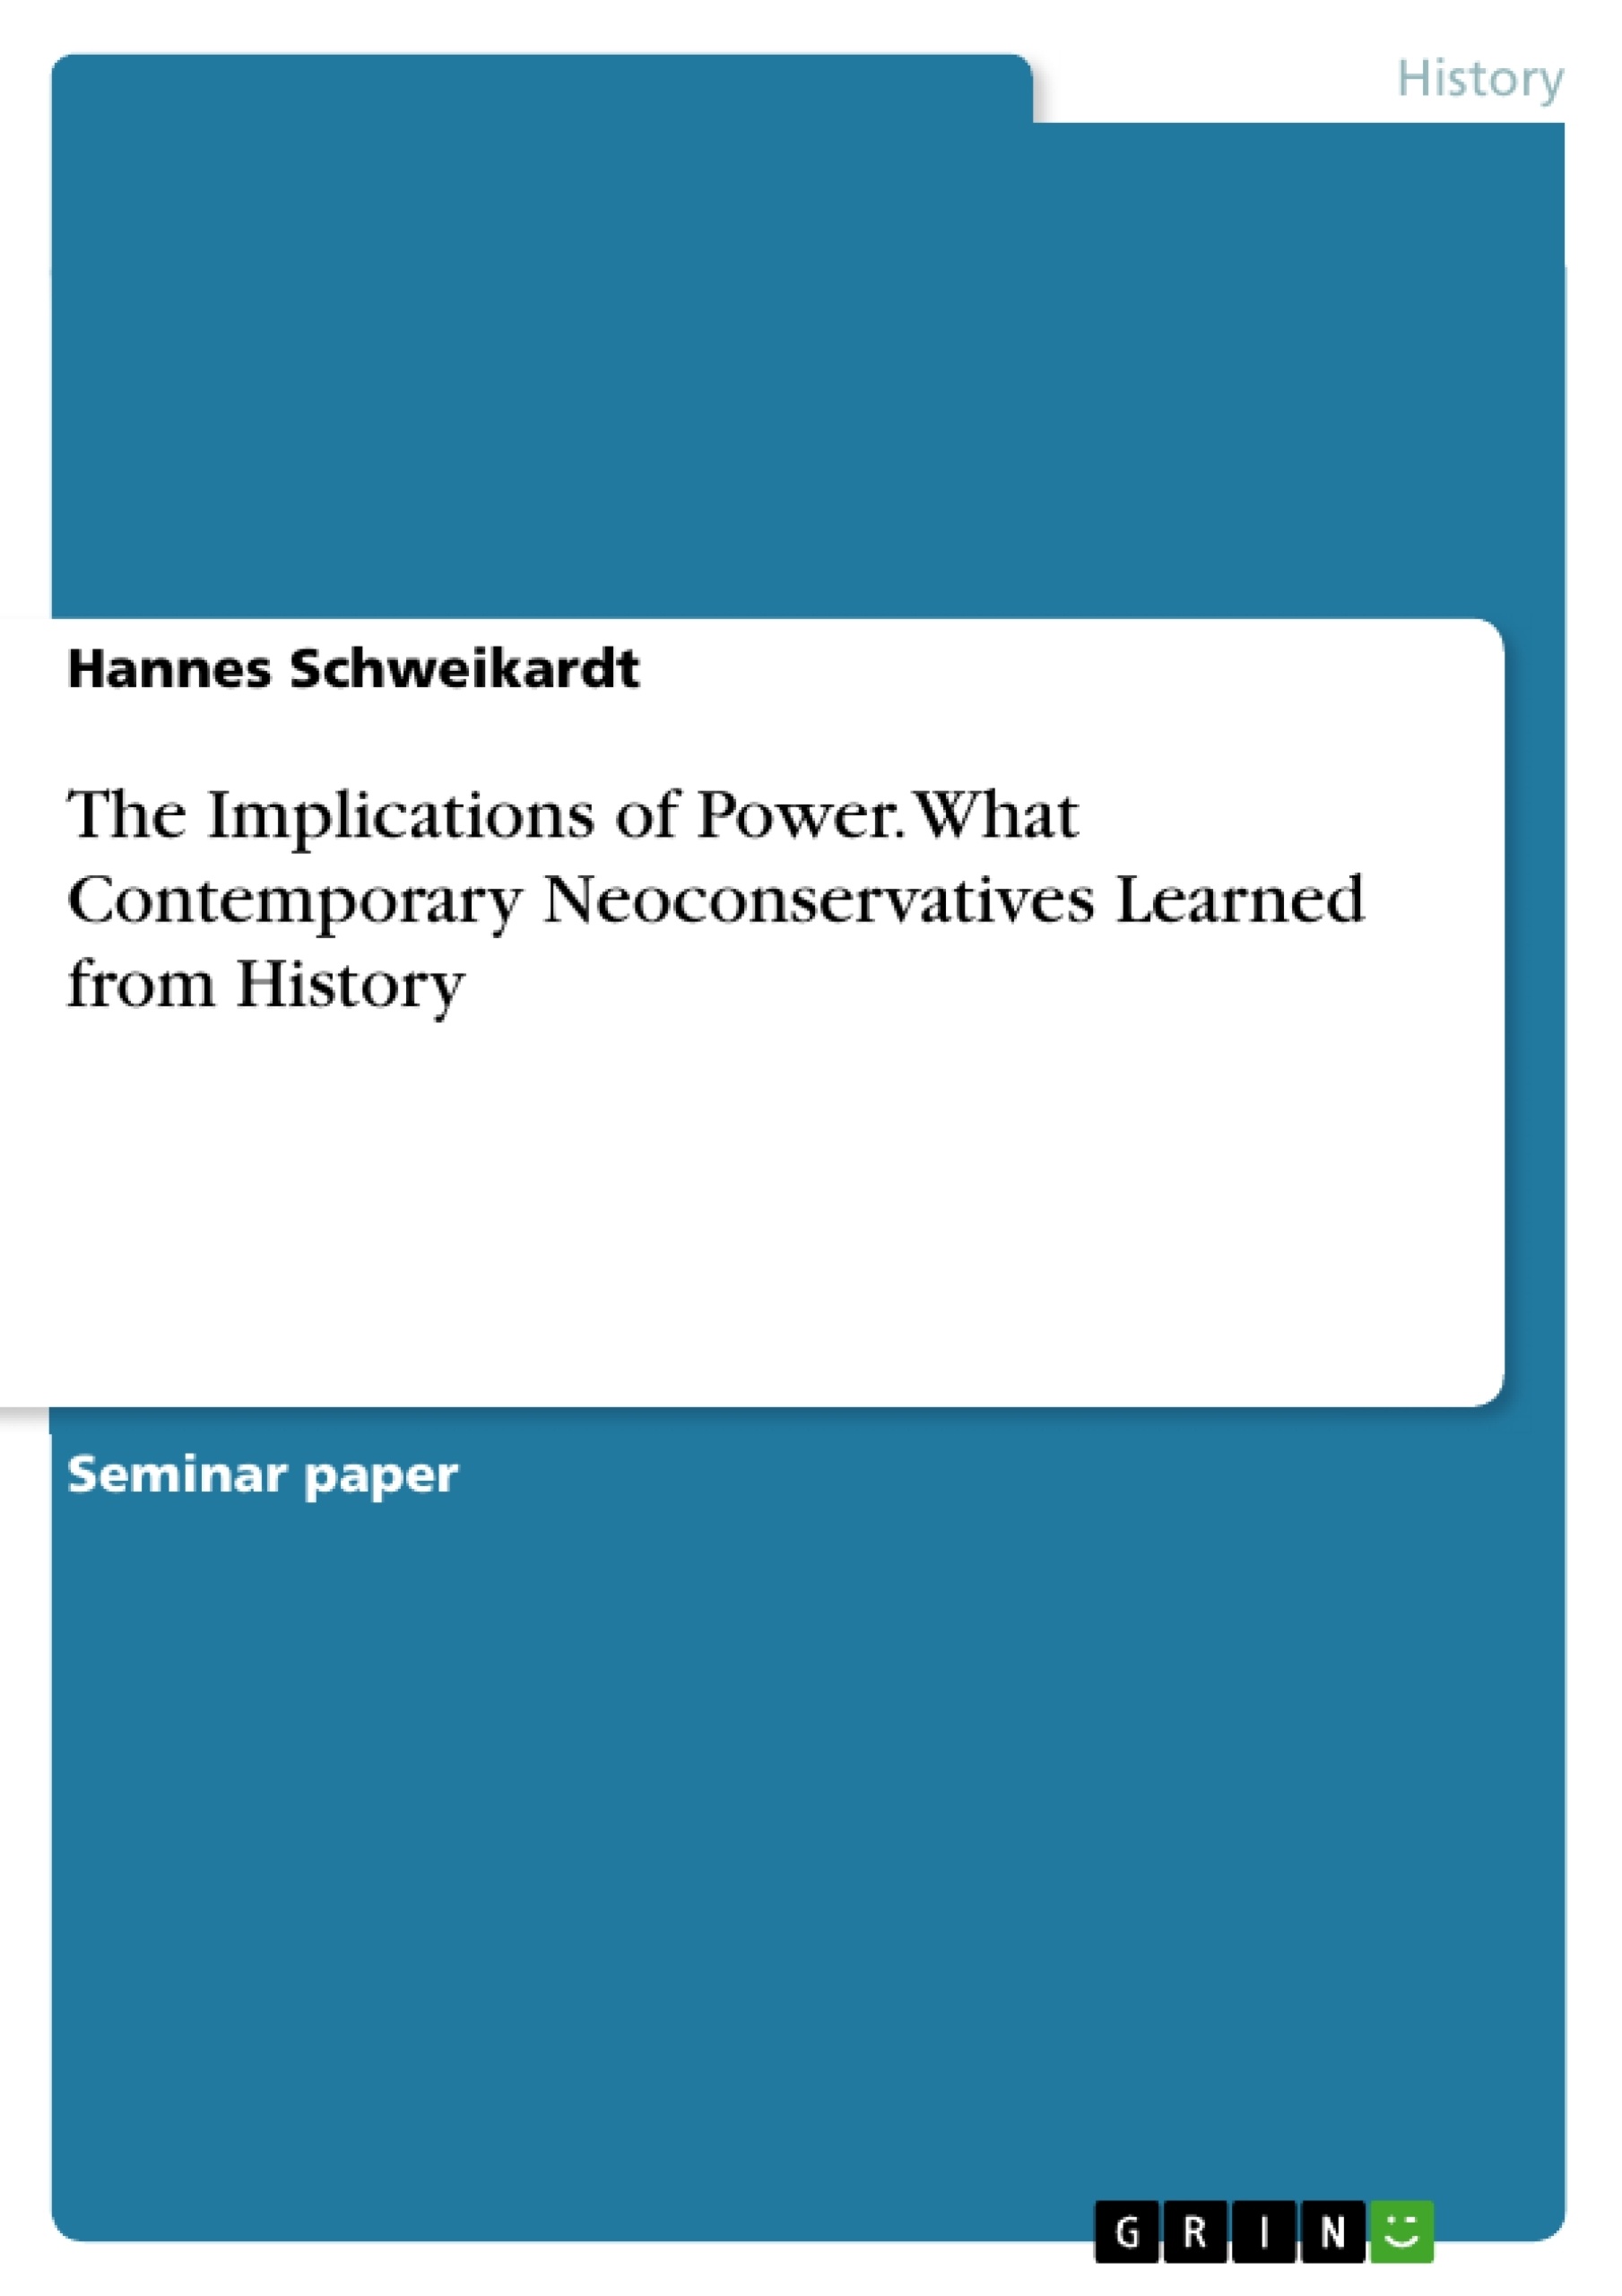 Title: The Implications of Power. What Contemporary Neoconservatives Learned from History